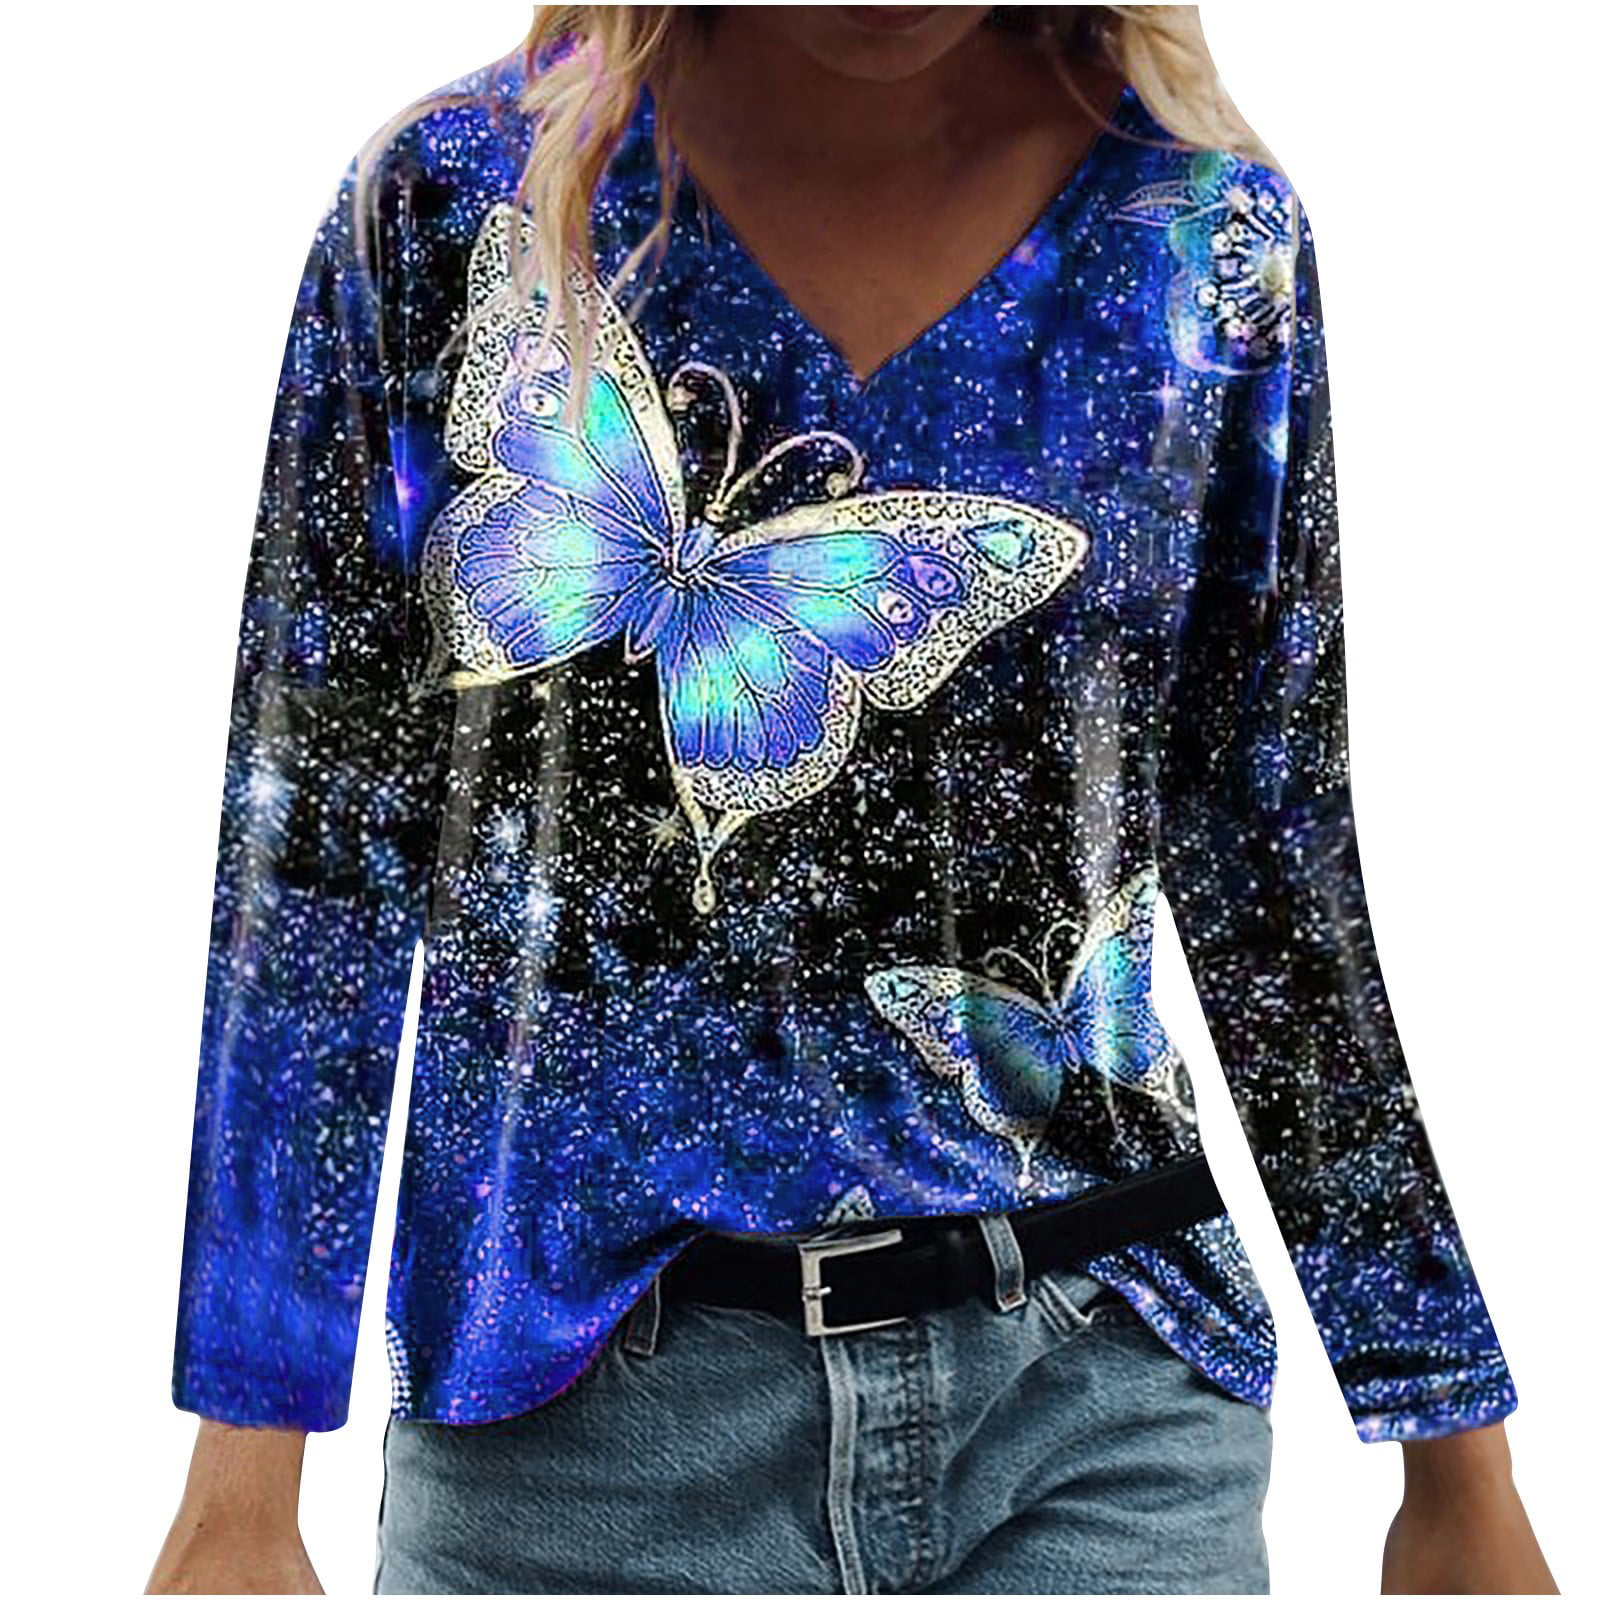 Fashion Tops Long Tops Forever Long Top blue glittery 